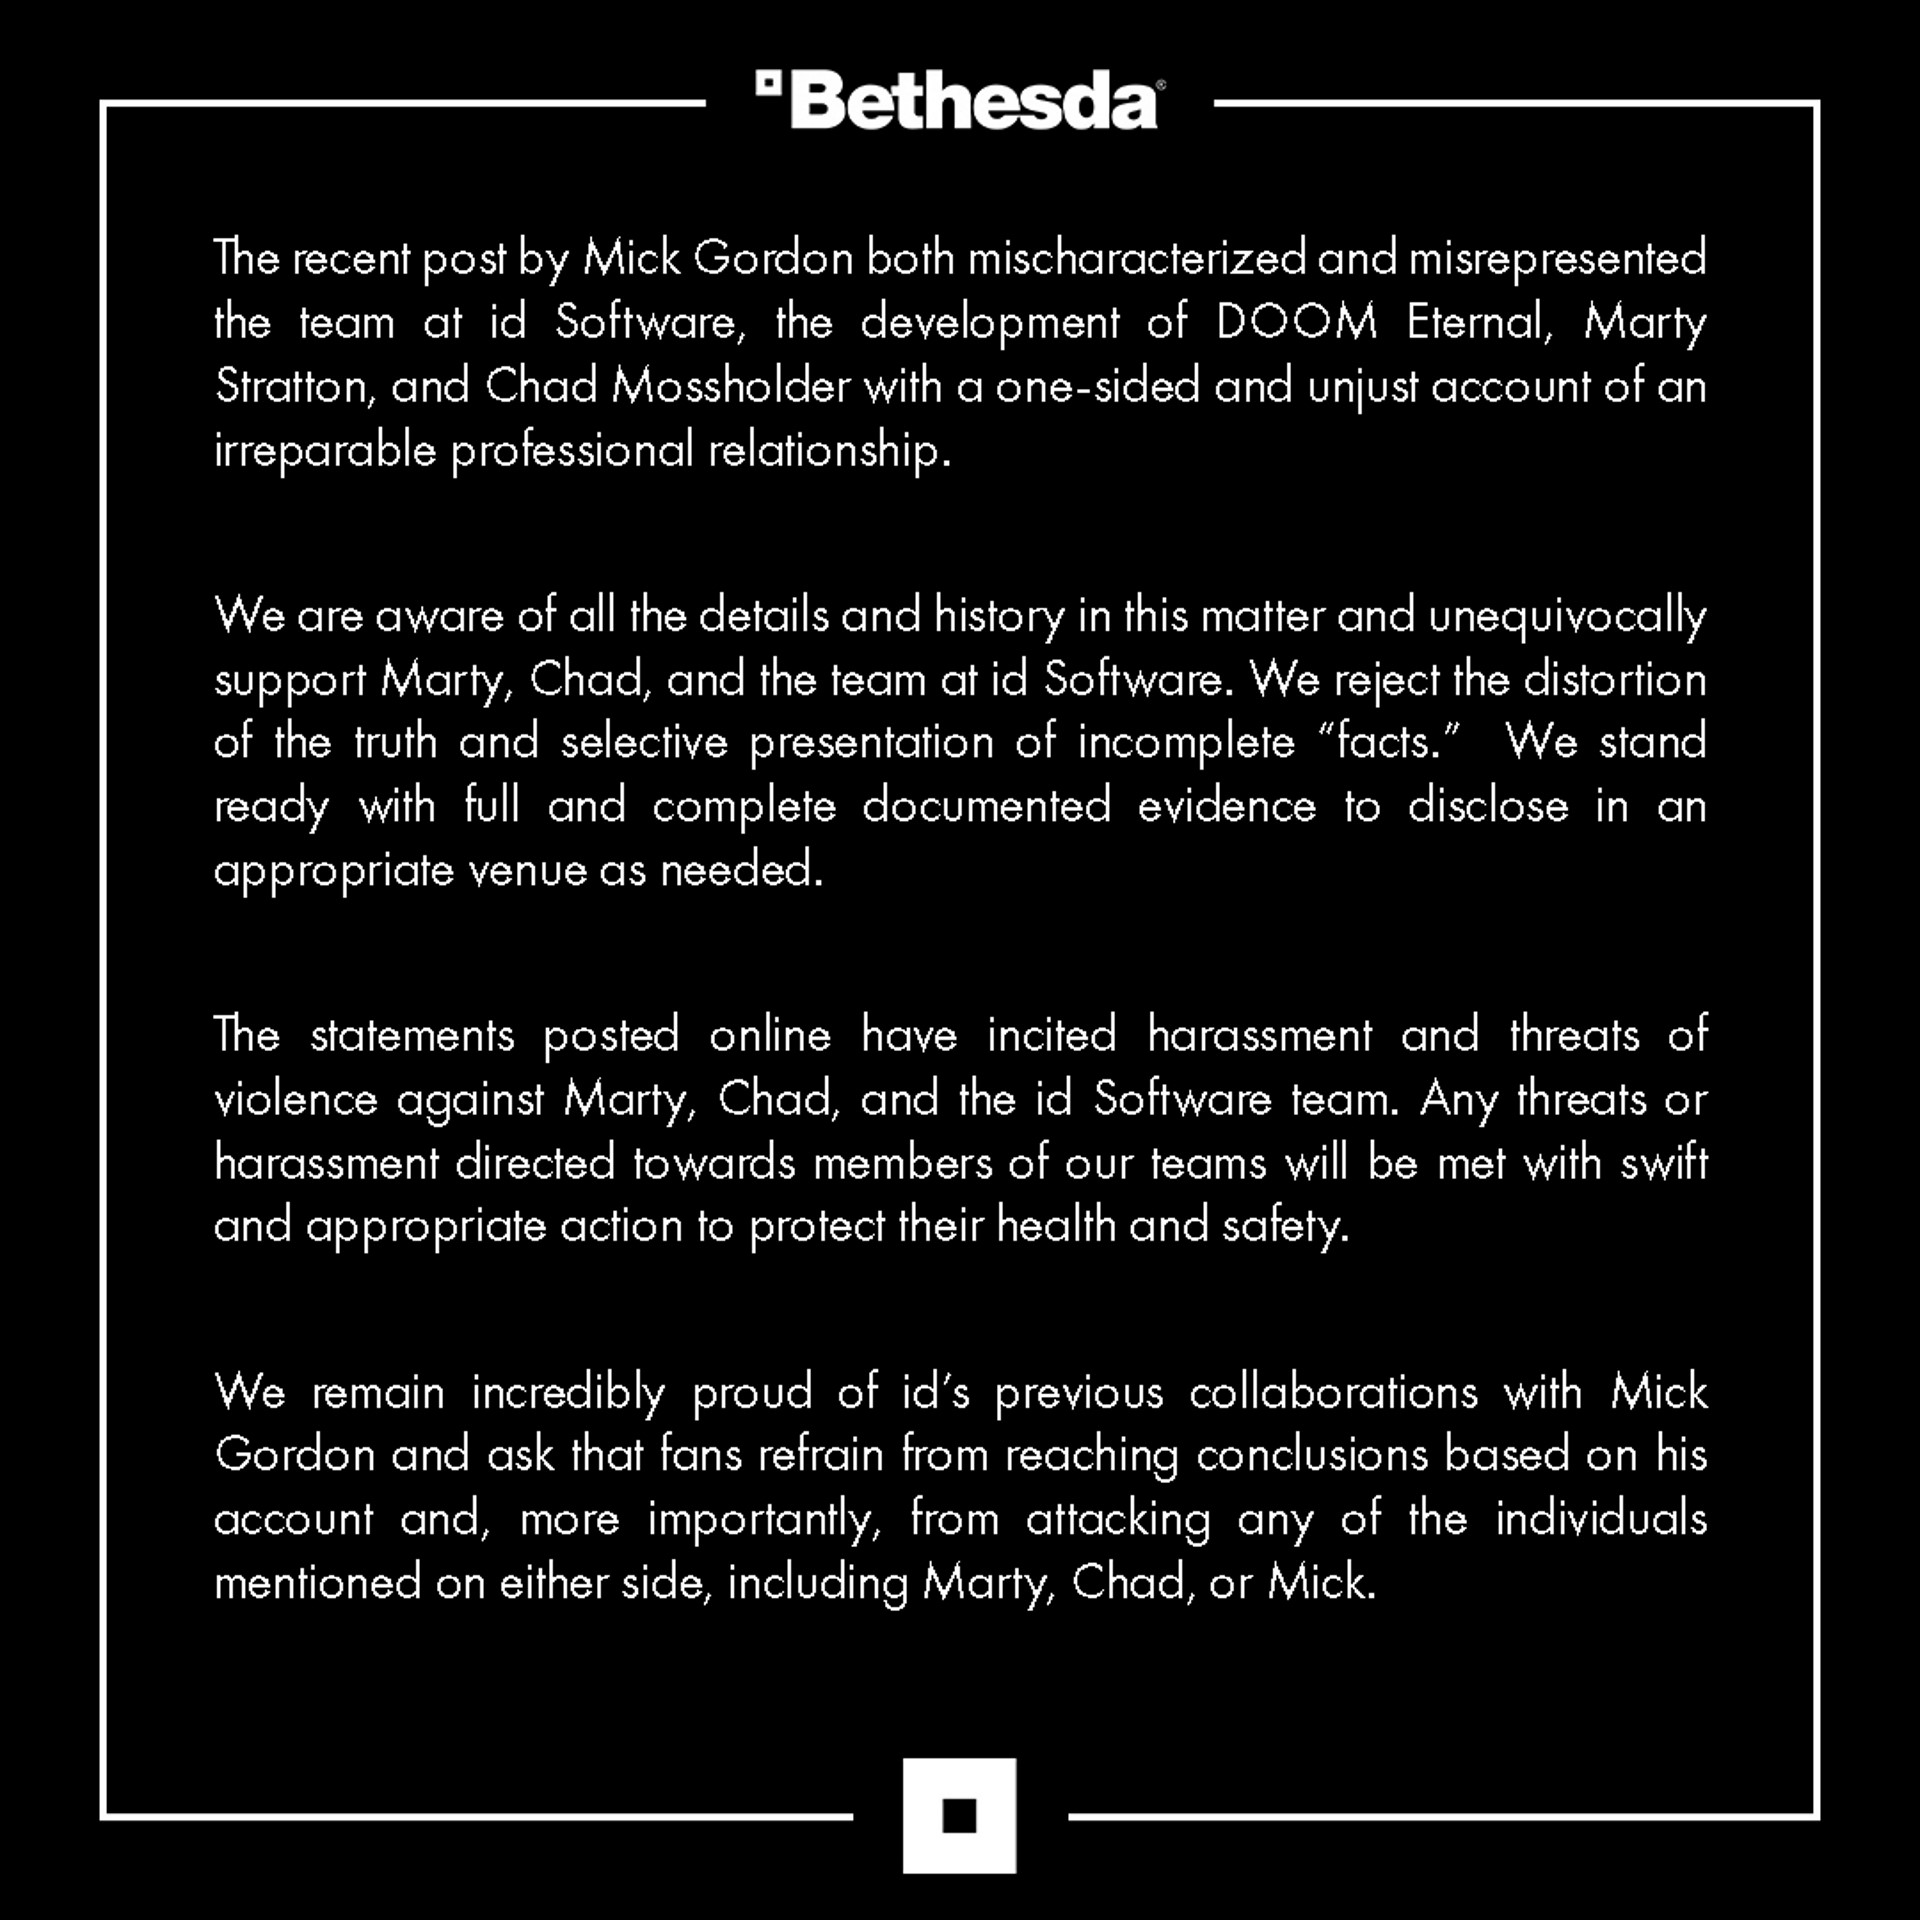 Bethesda rejects Mick Gordon allegations as ‘distortion of the truth’